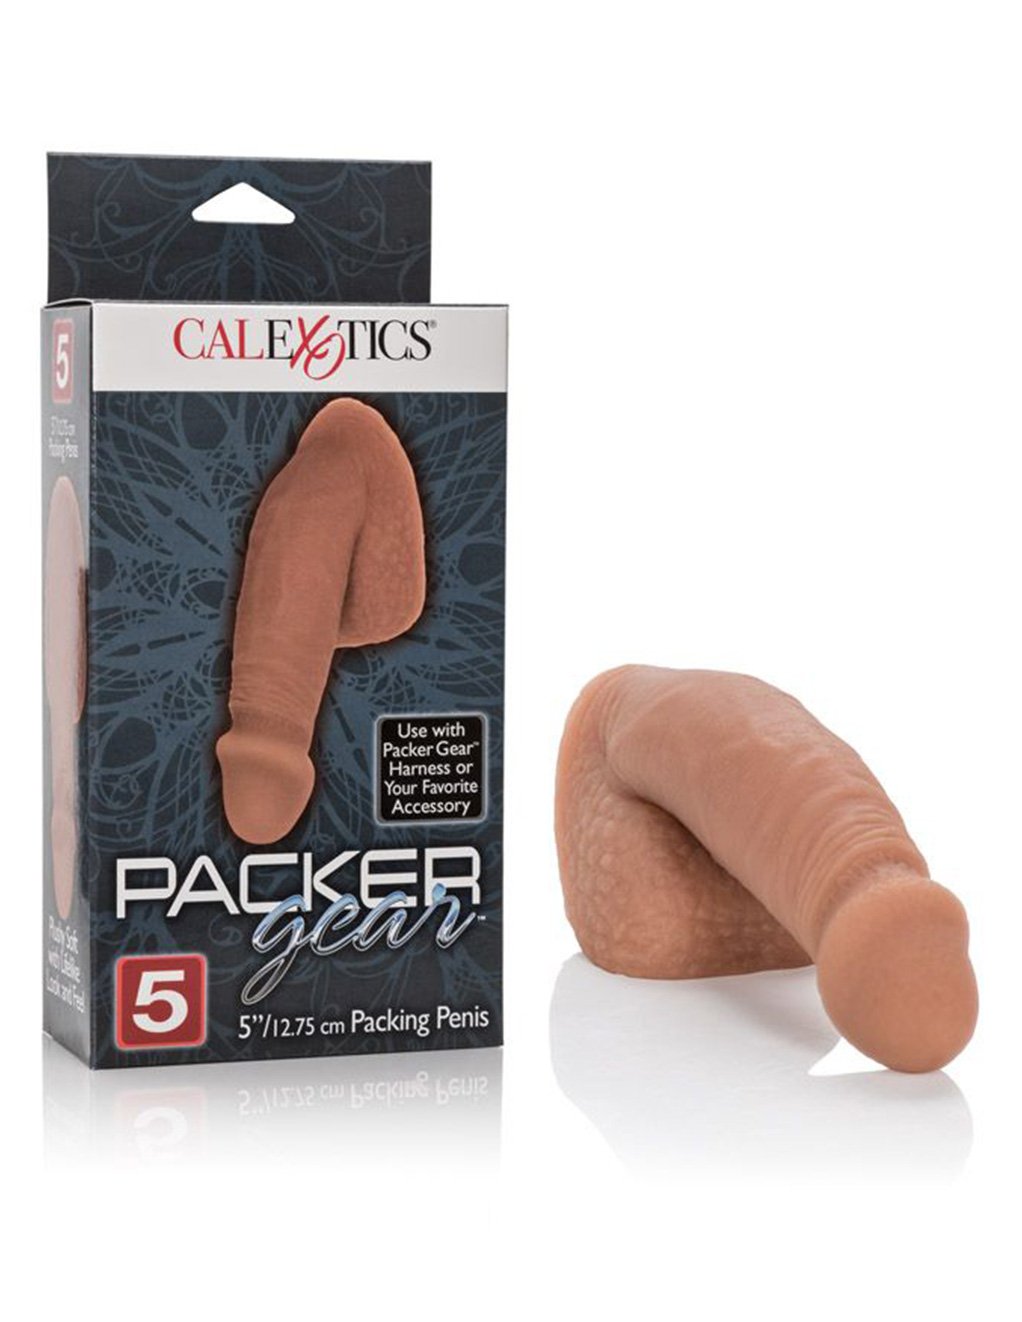 Packer Gear 5 Inch Packing Penis- Brown- With box